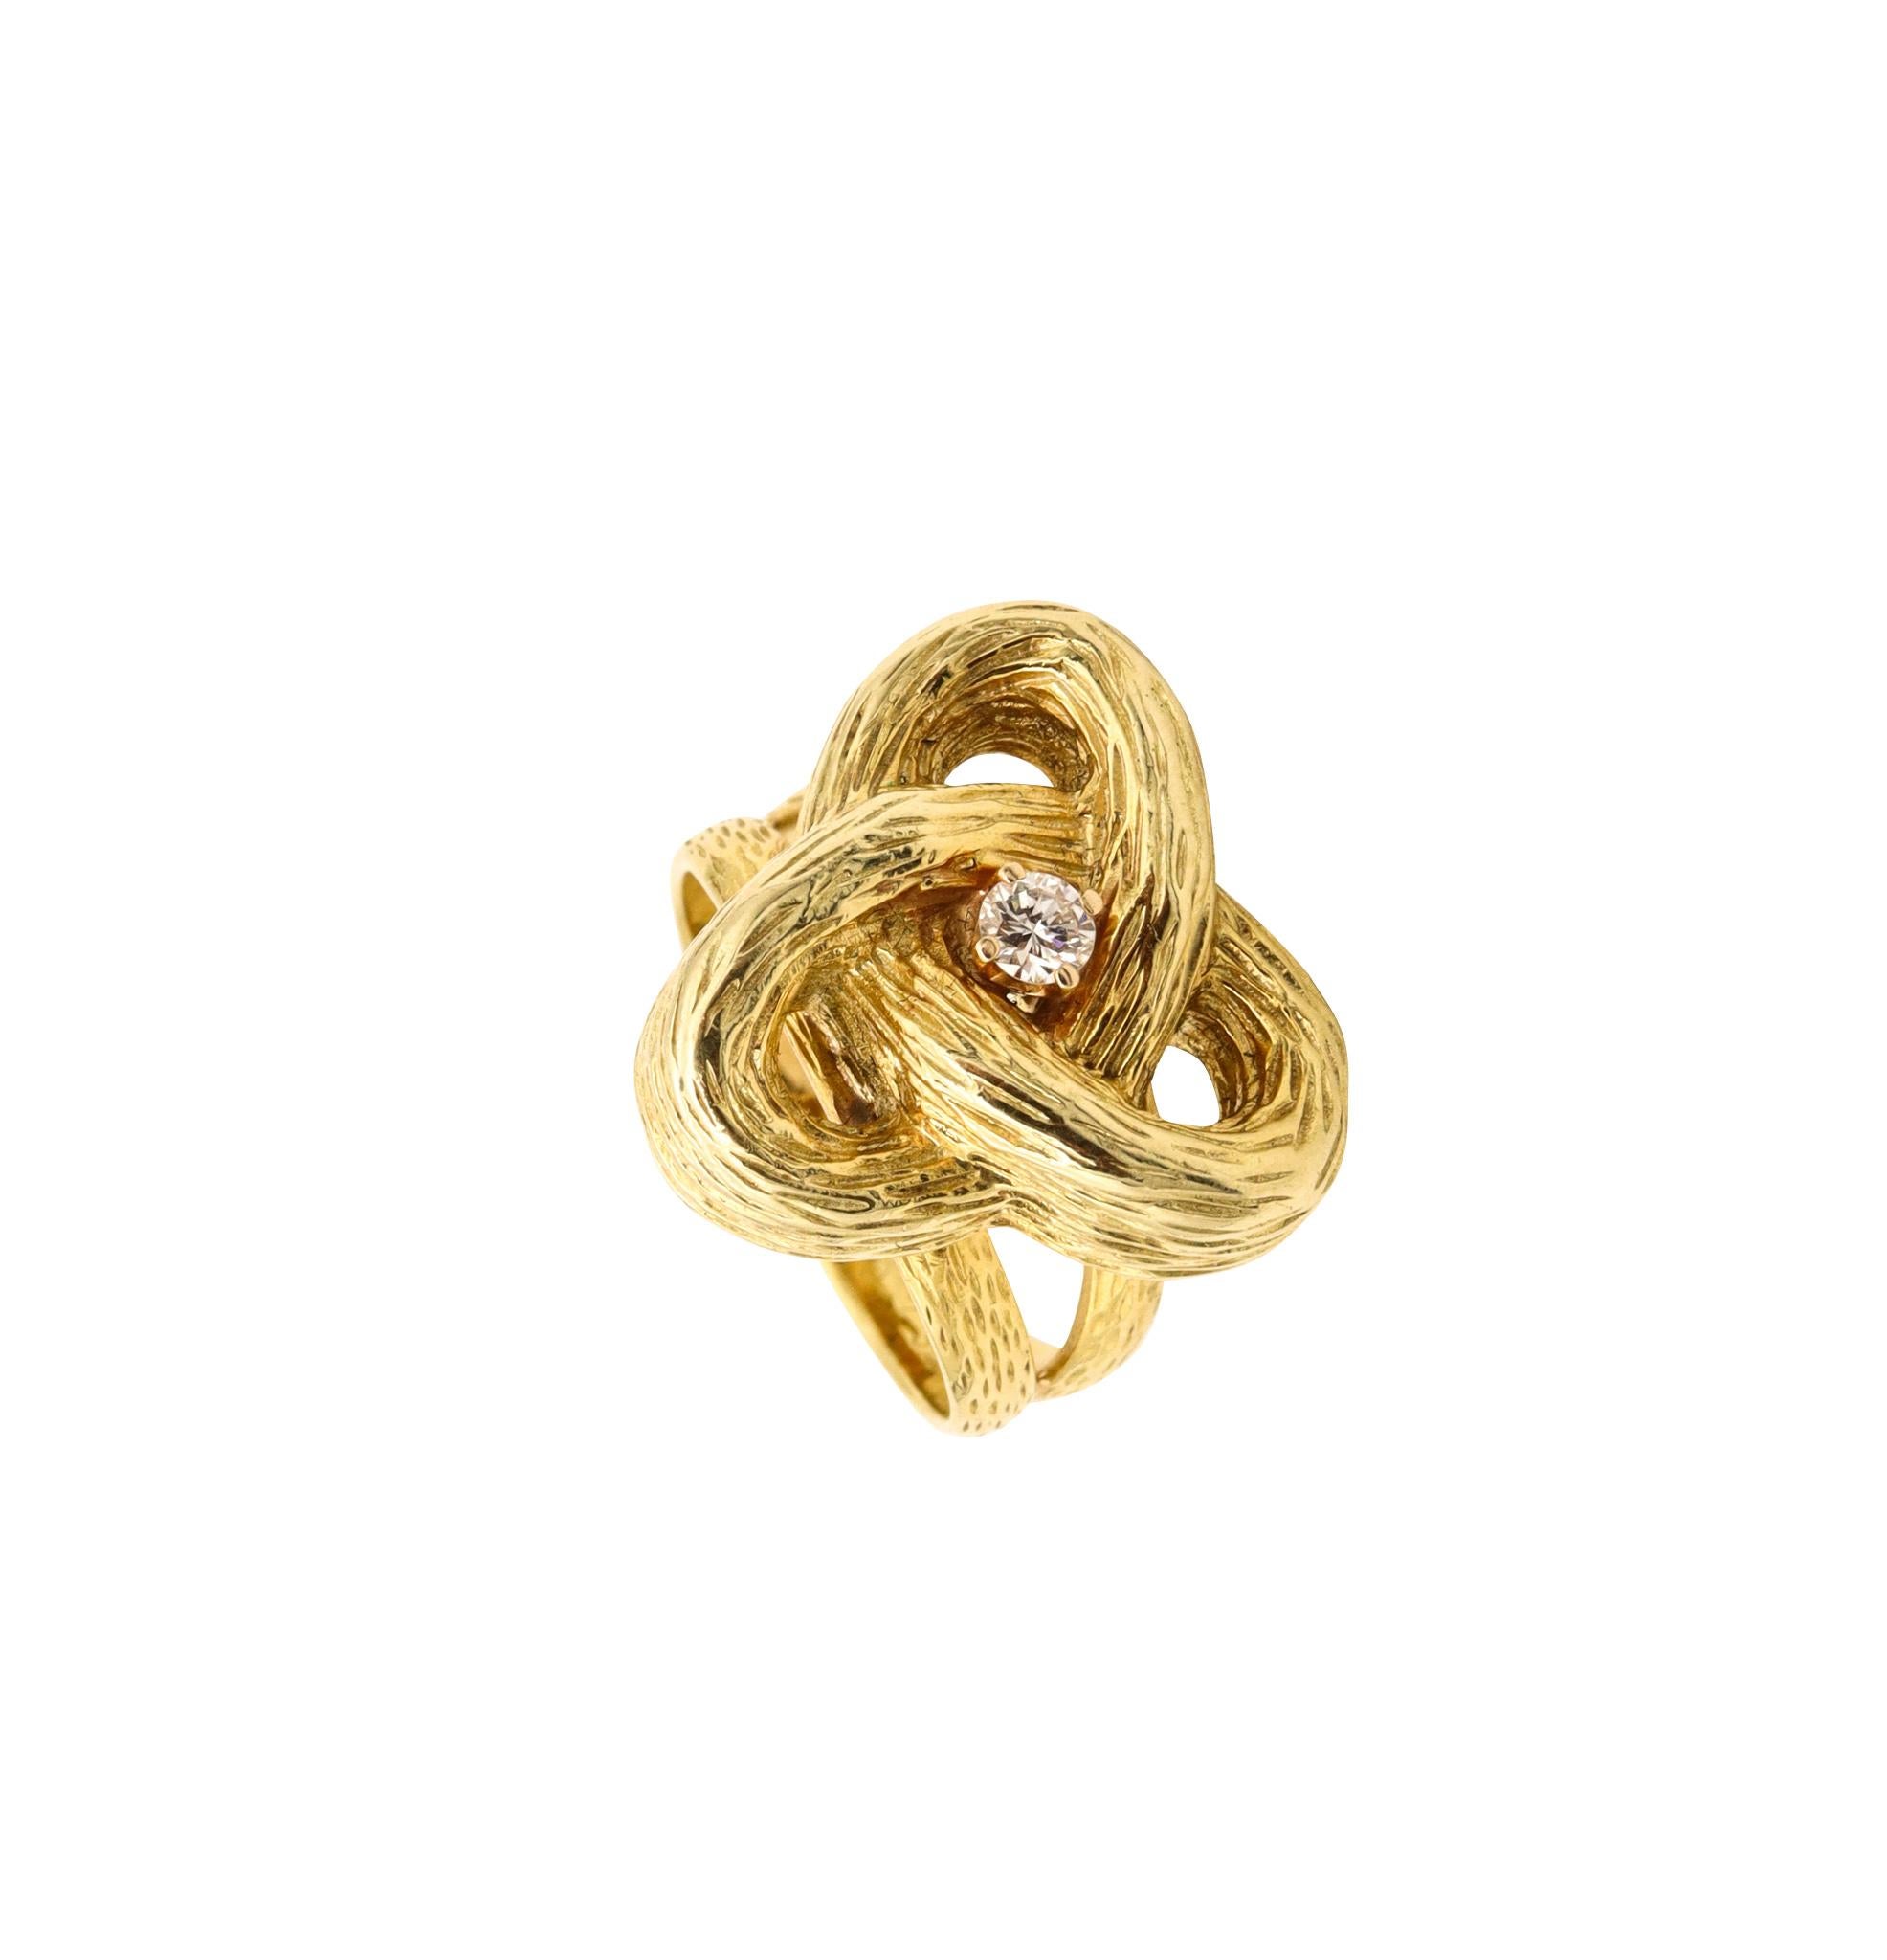 Cartier 1970 Celtic Triquetra Knot Ring in 18Kt Yellow Gold with VS Diamond 4